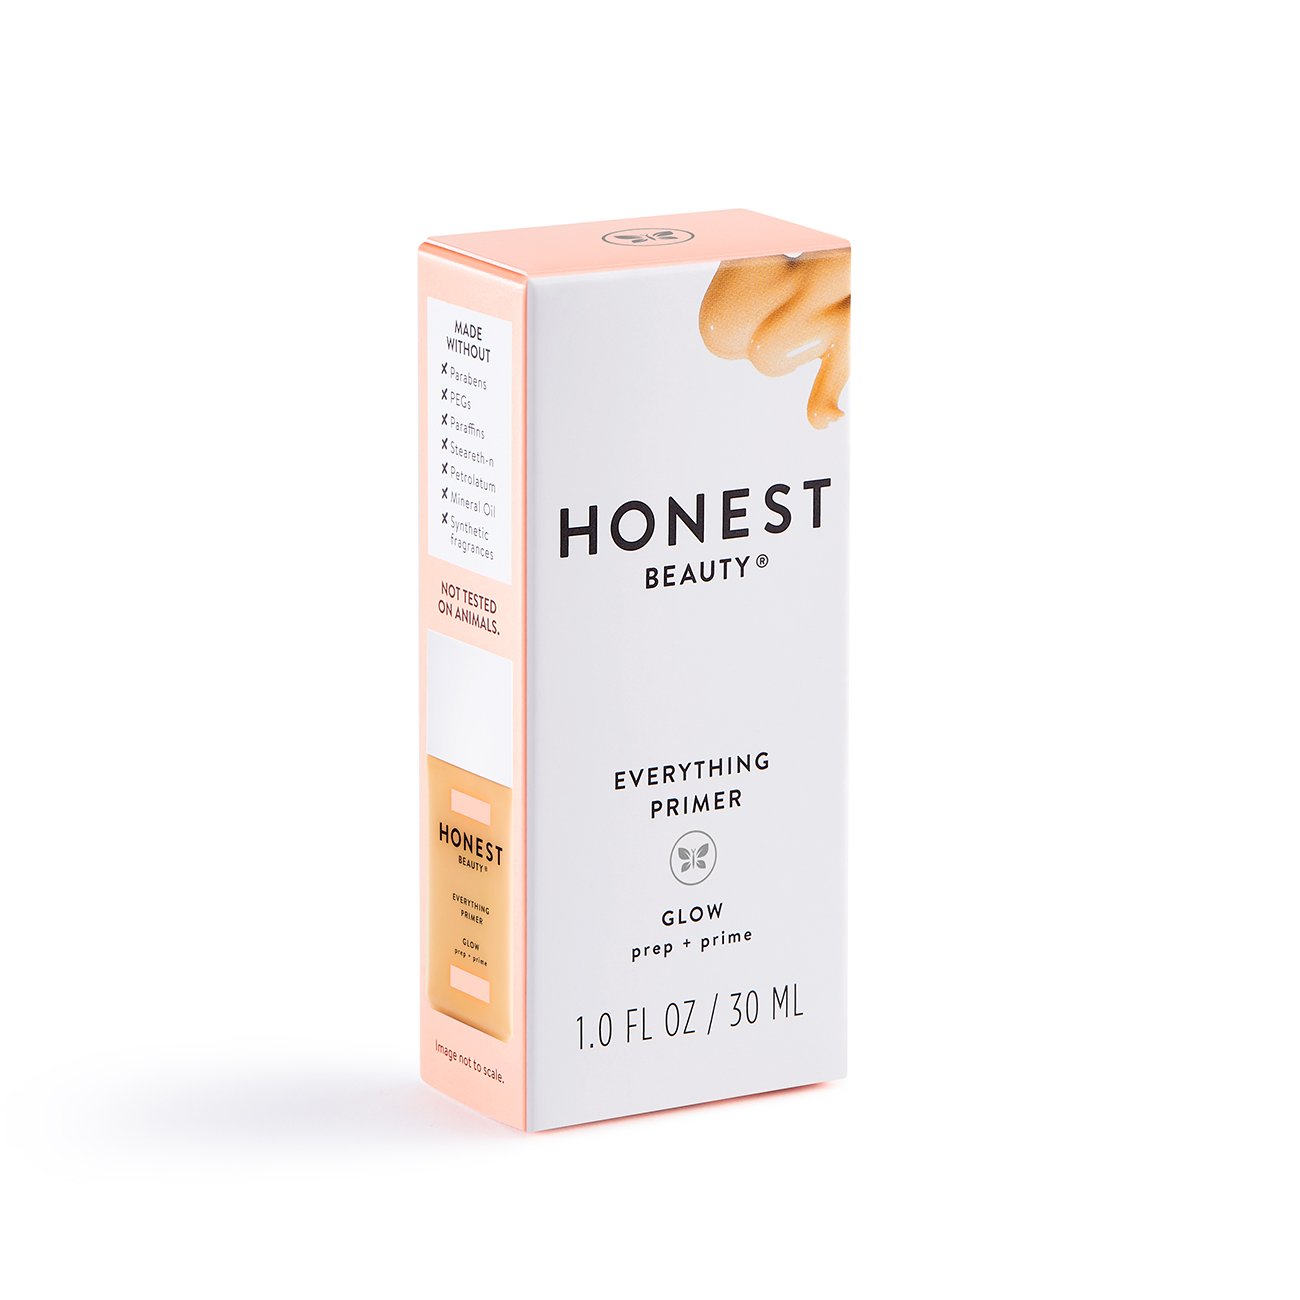  Honest Beauty Everything Primer, Glow with Hyaluronic Acid | Paraben Free, Dermatologist Tested, Cruelty Free | 1.0 fl. oz.